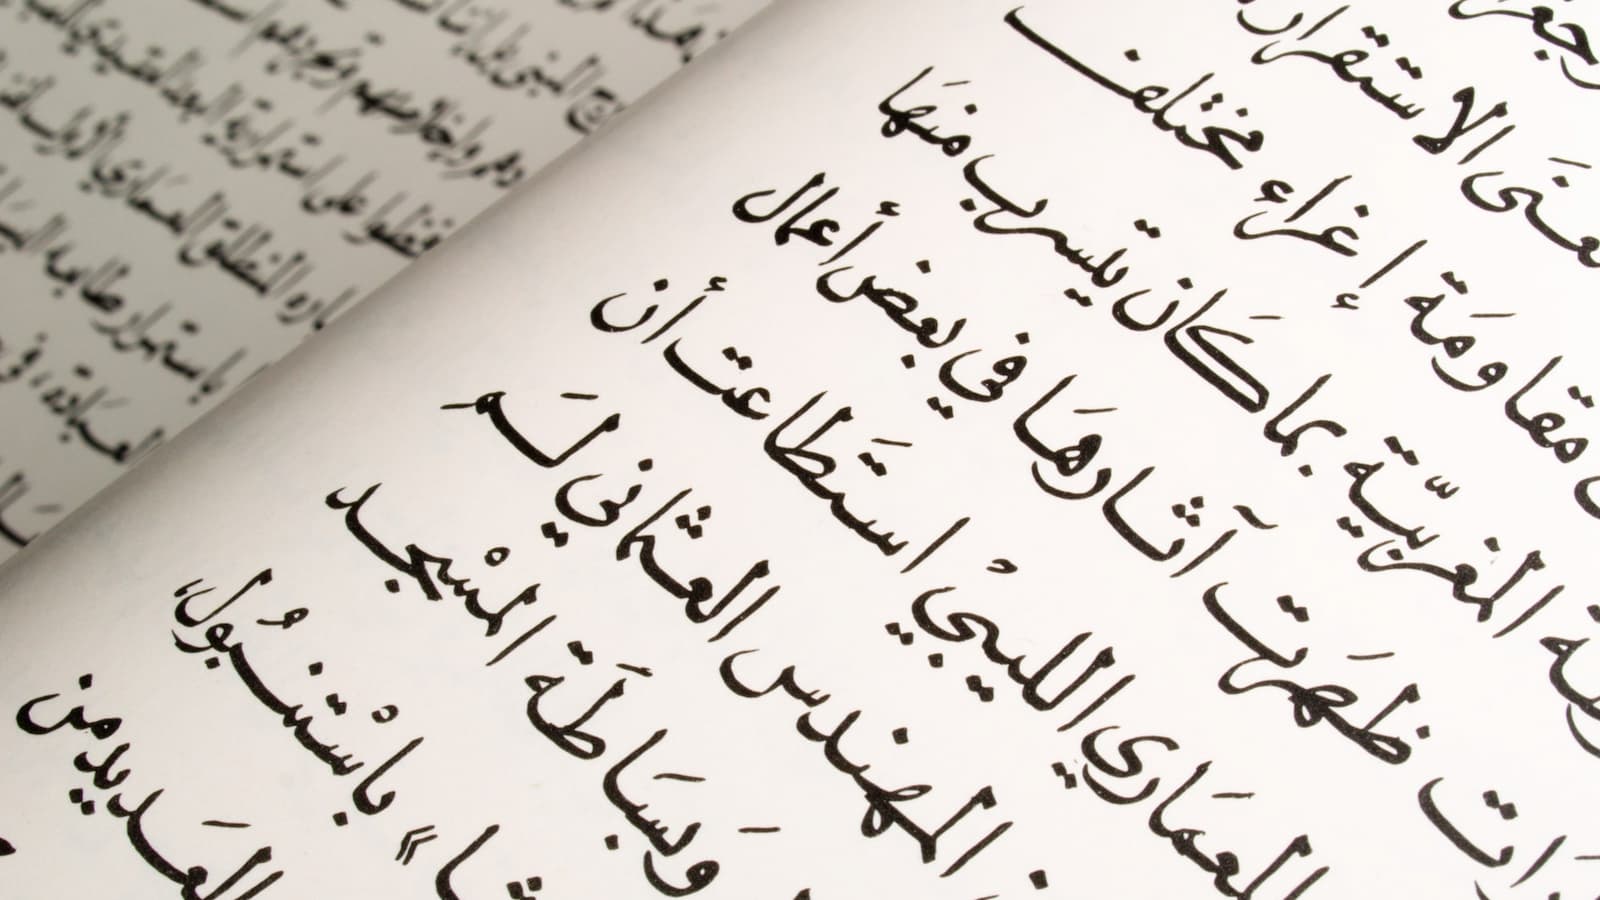 Arabic Language Day 2023: Date, History and 5 Interesting Facts About Arabic